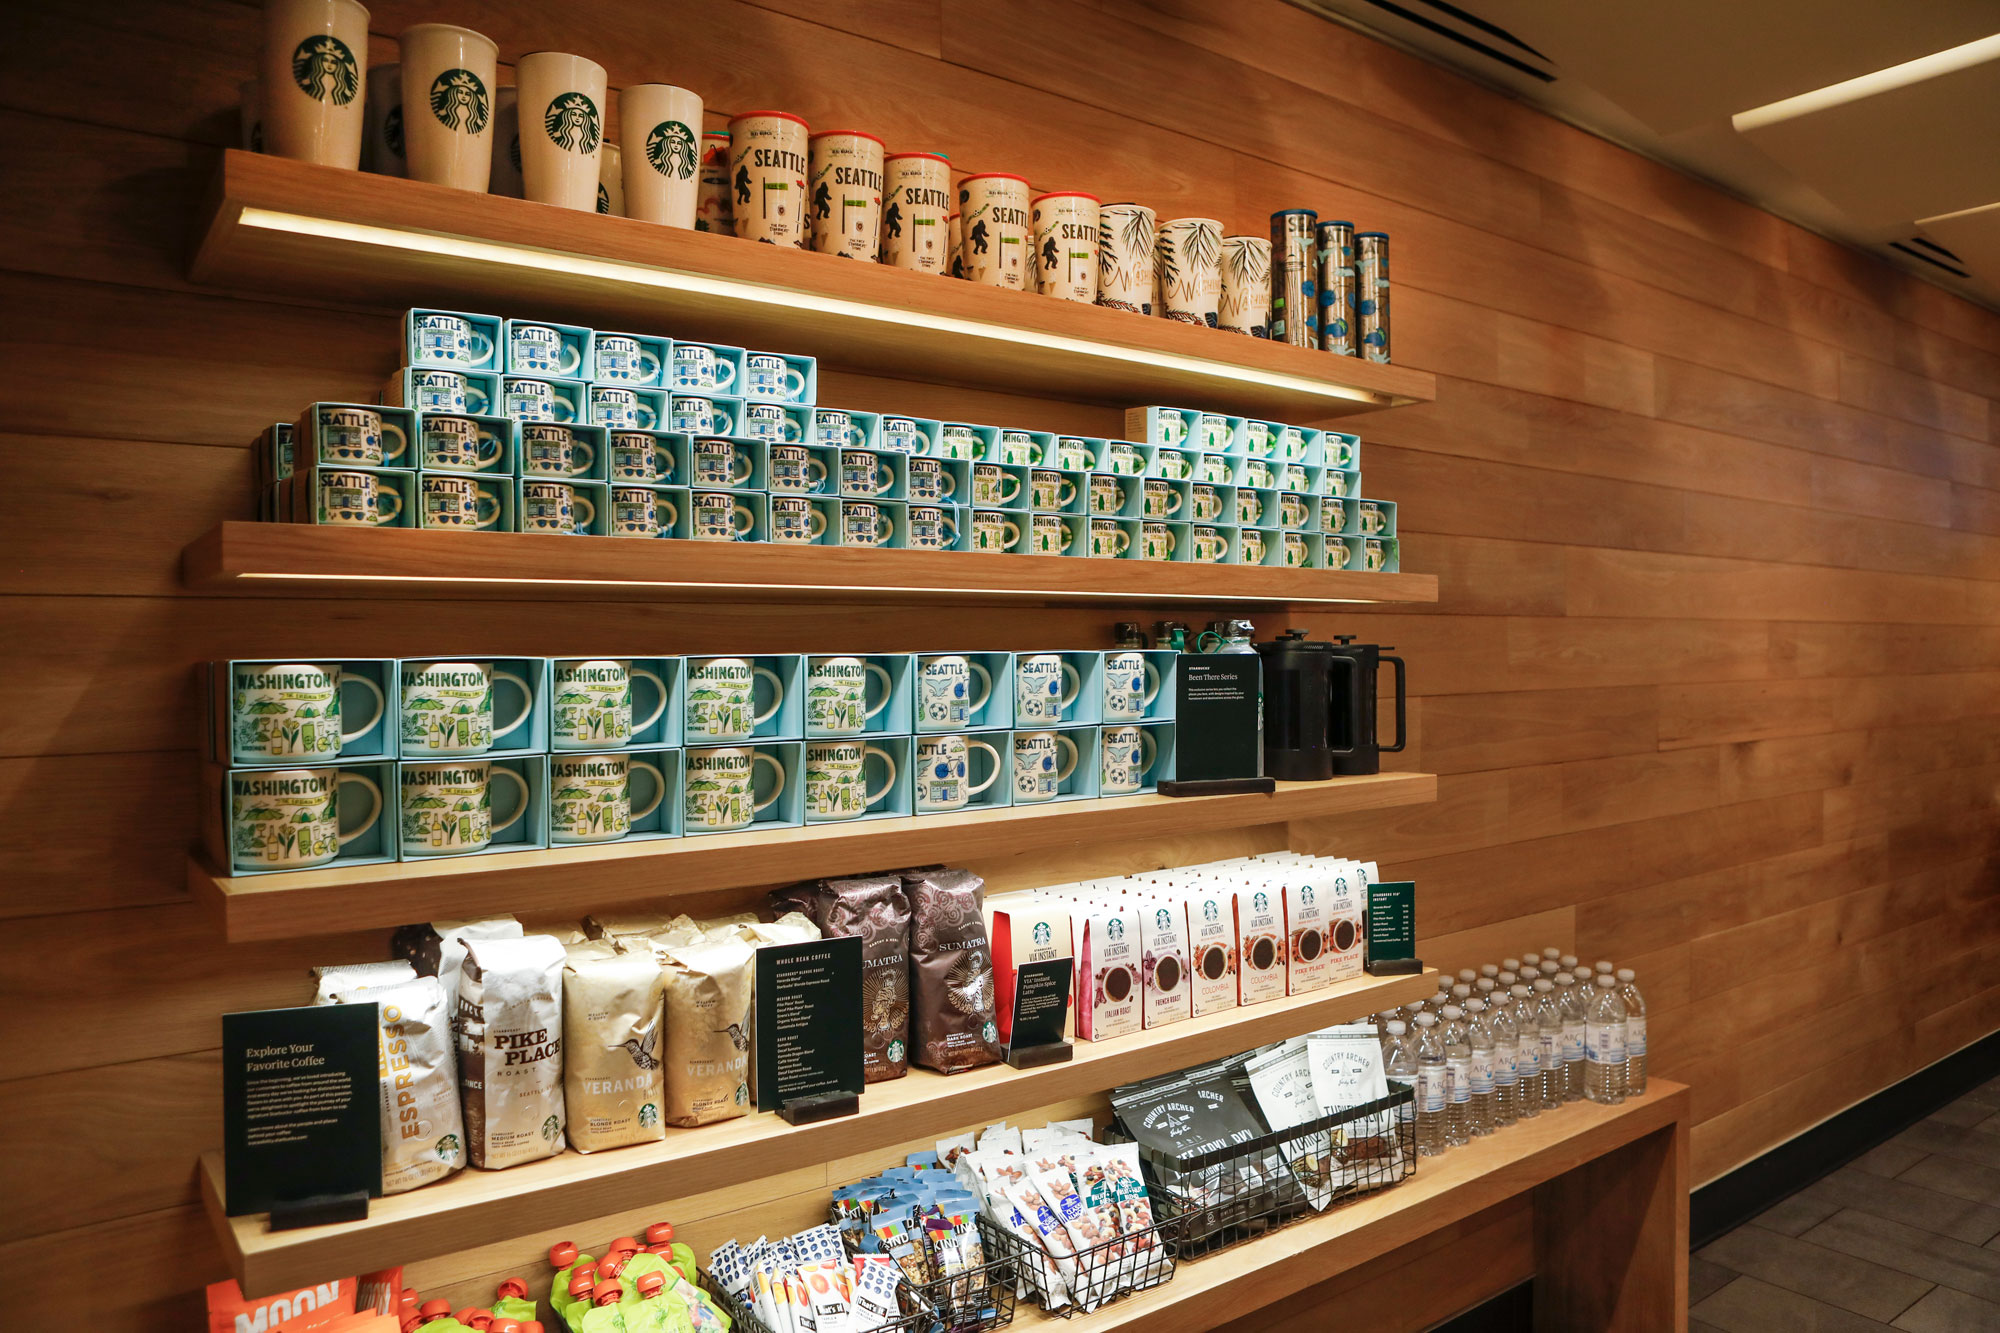 SEA Starbucks (D Gates) Interior Product Wall with Mugs and Coffee Packages